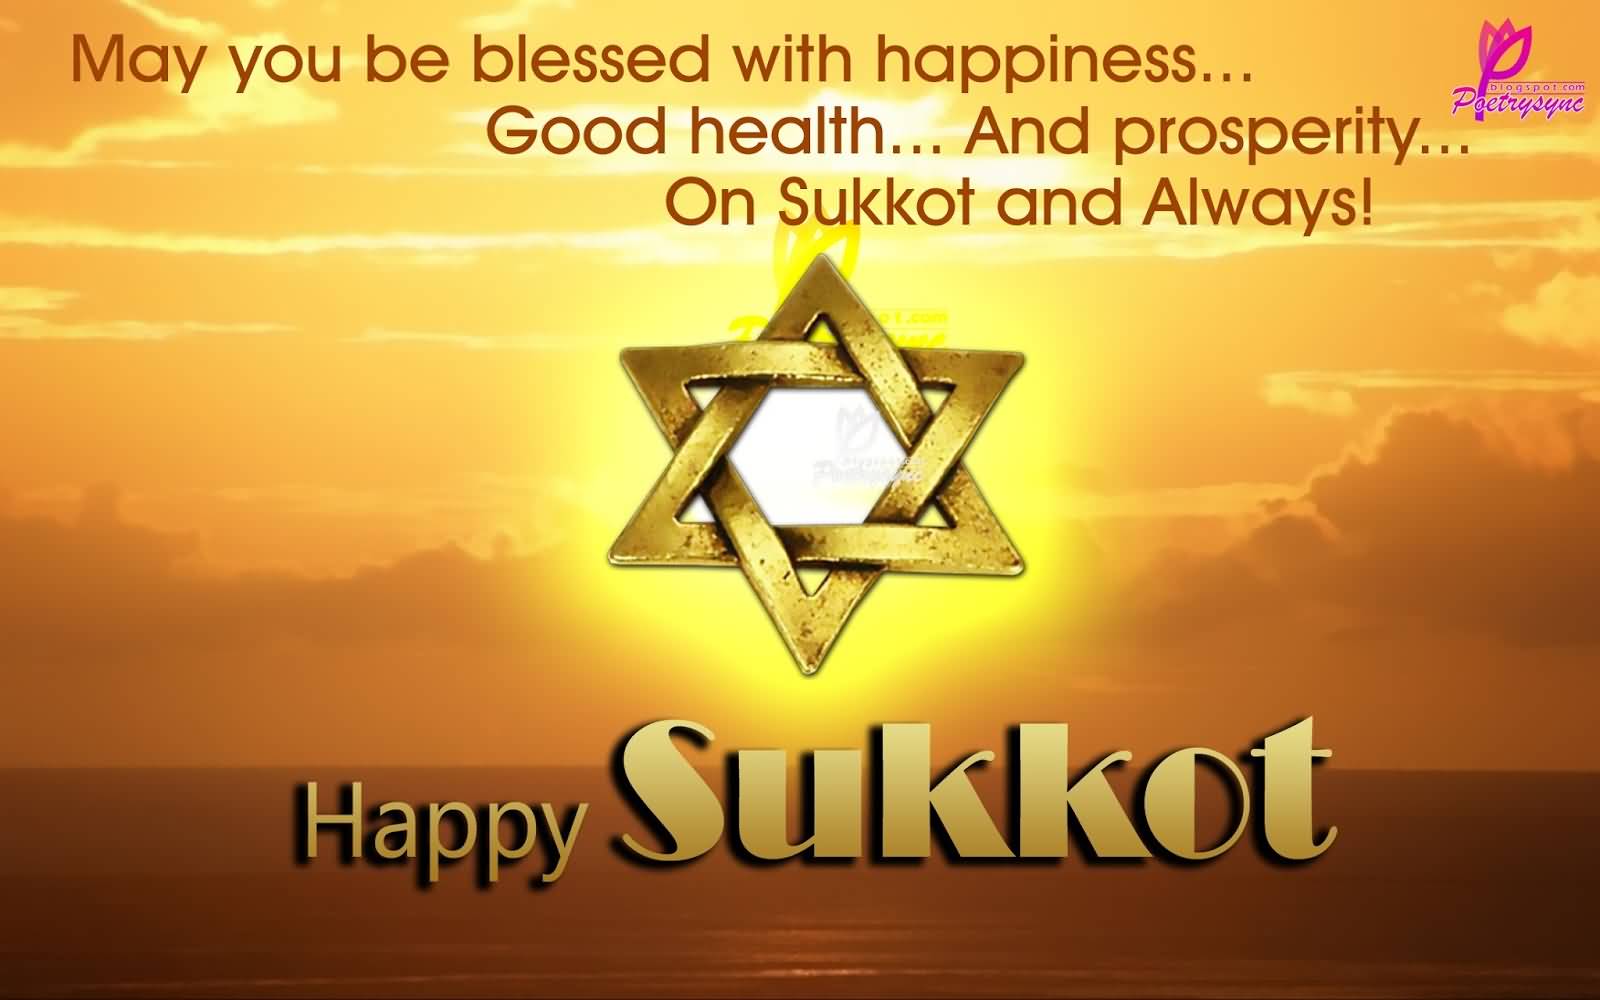 Best Pictures And Image Of Happy Sukkot Greetings